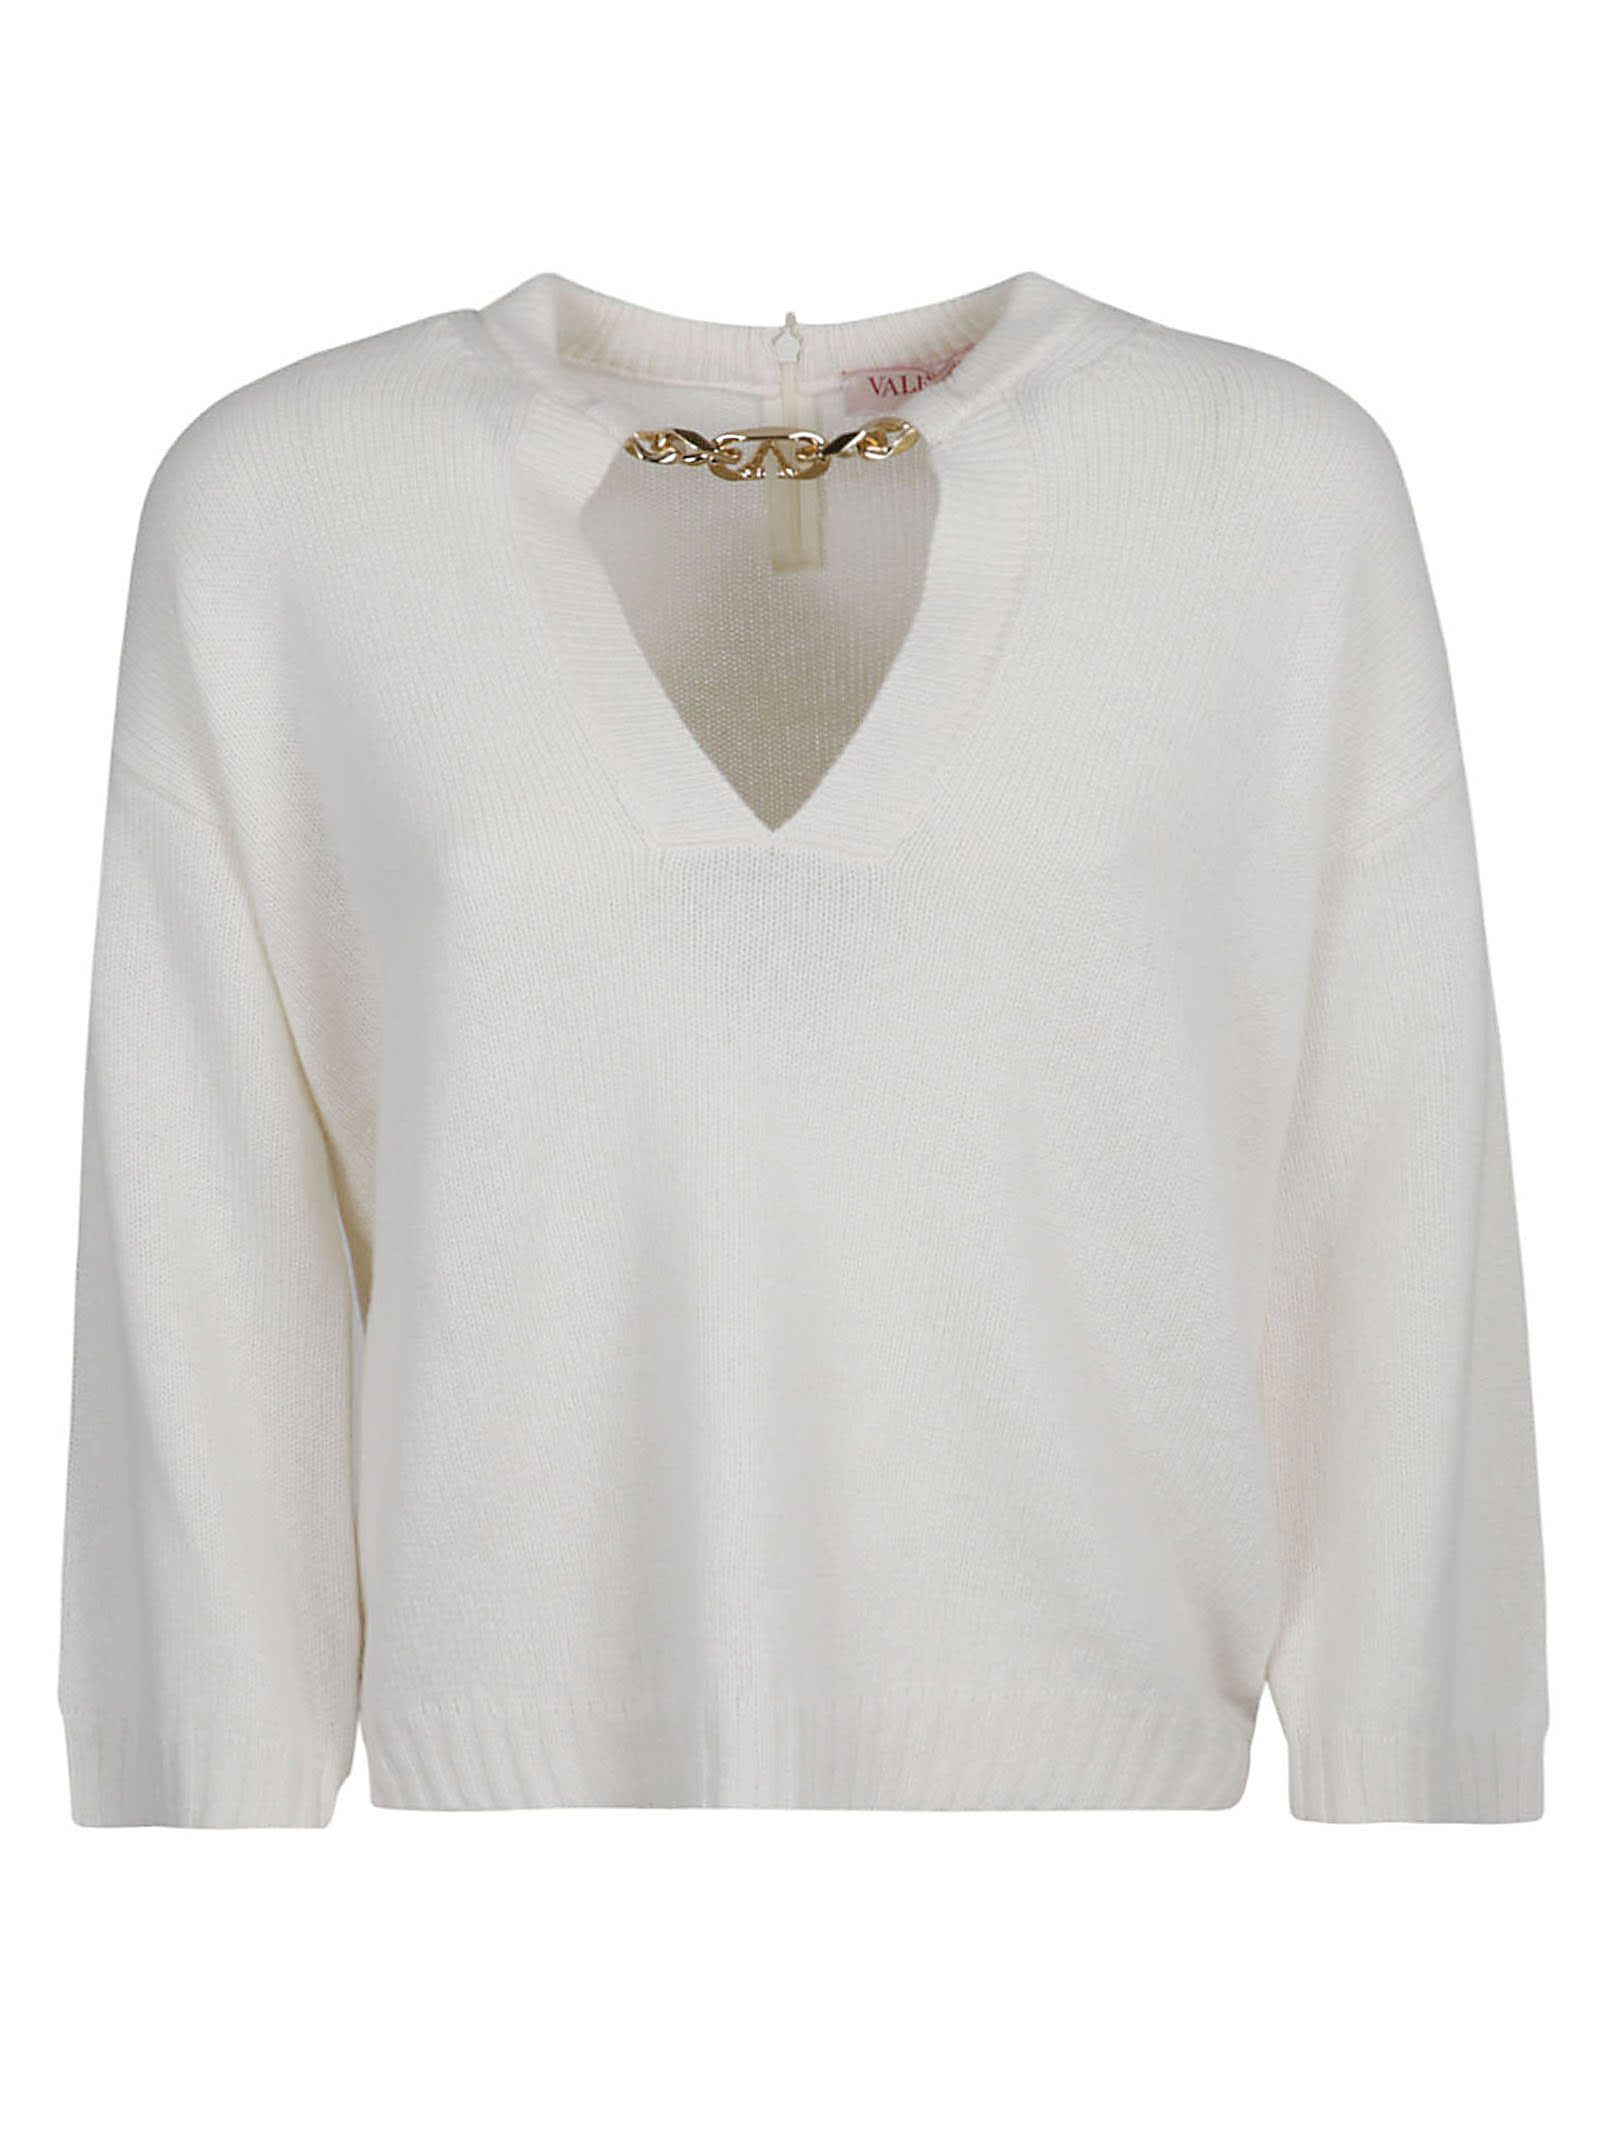 Valentino Cropped Knitted Jumper